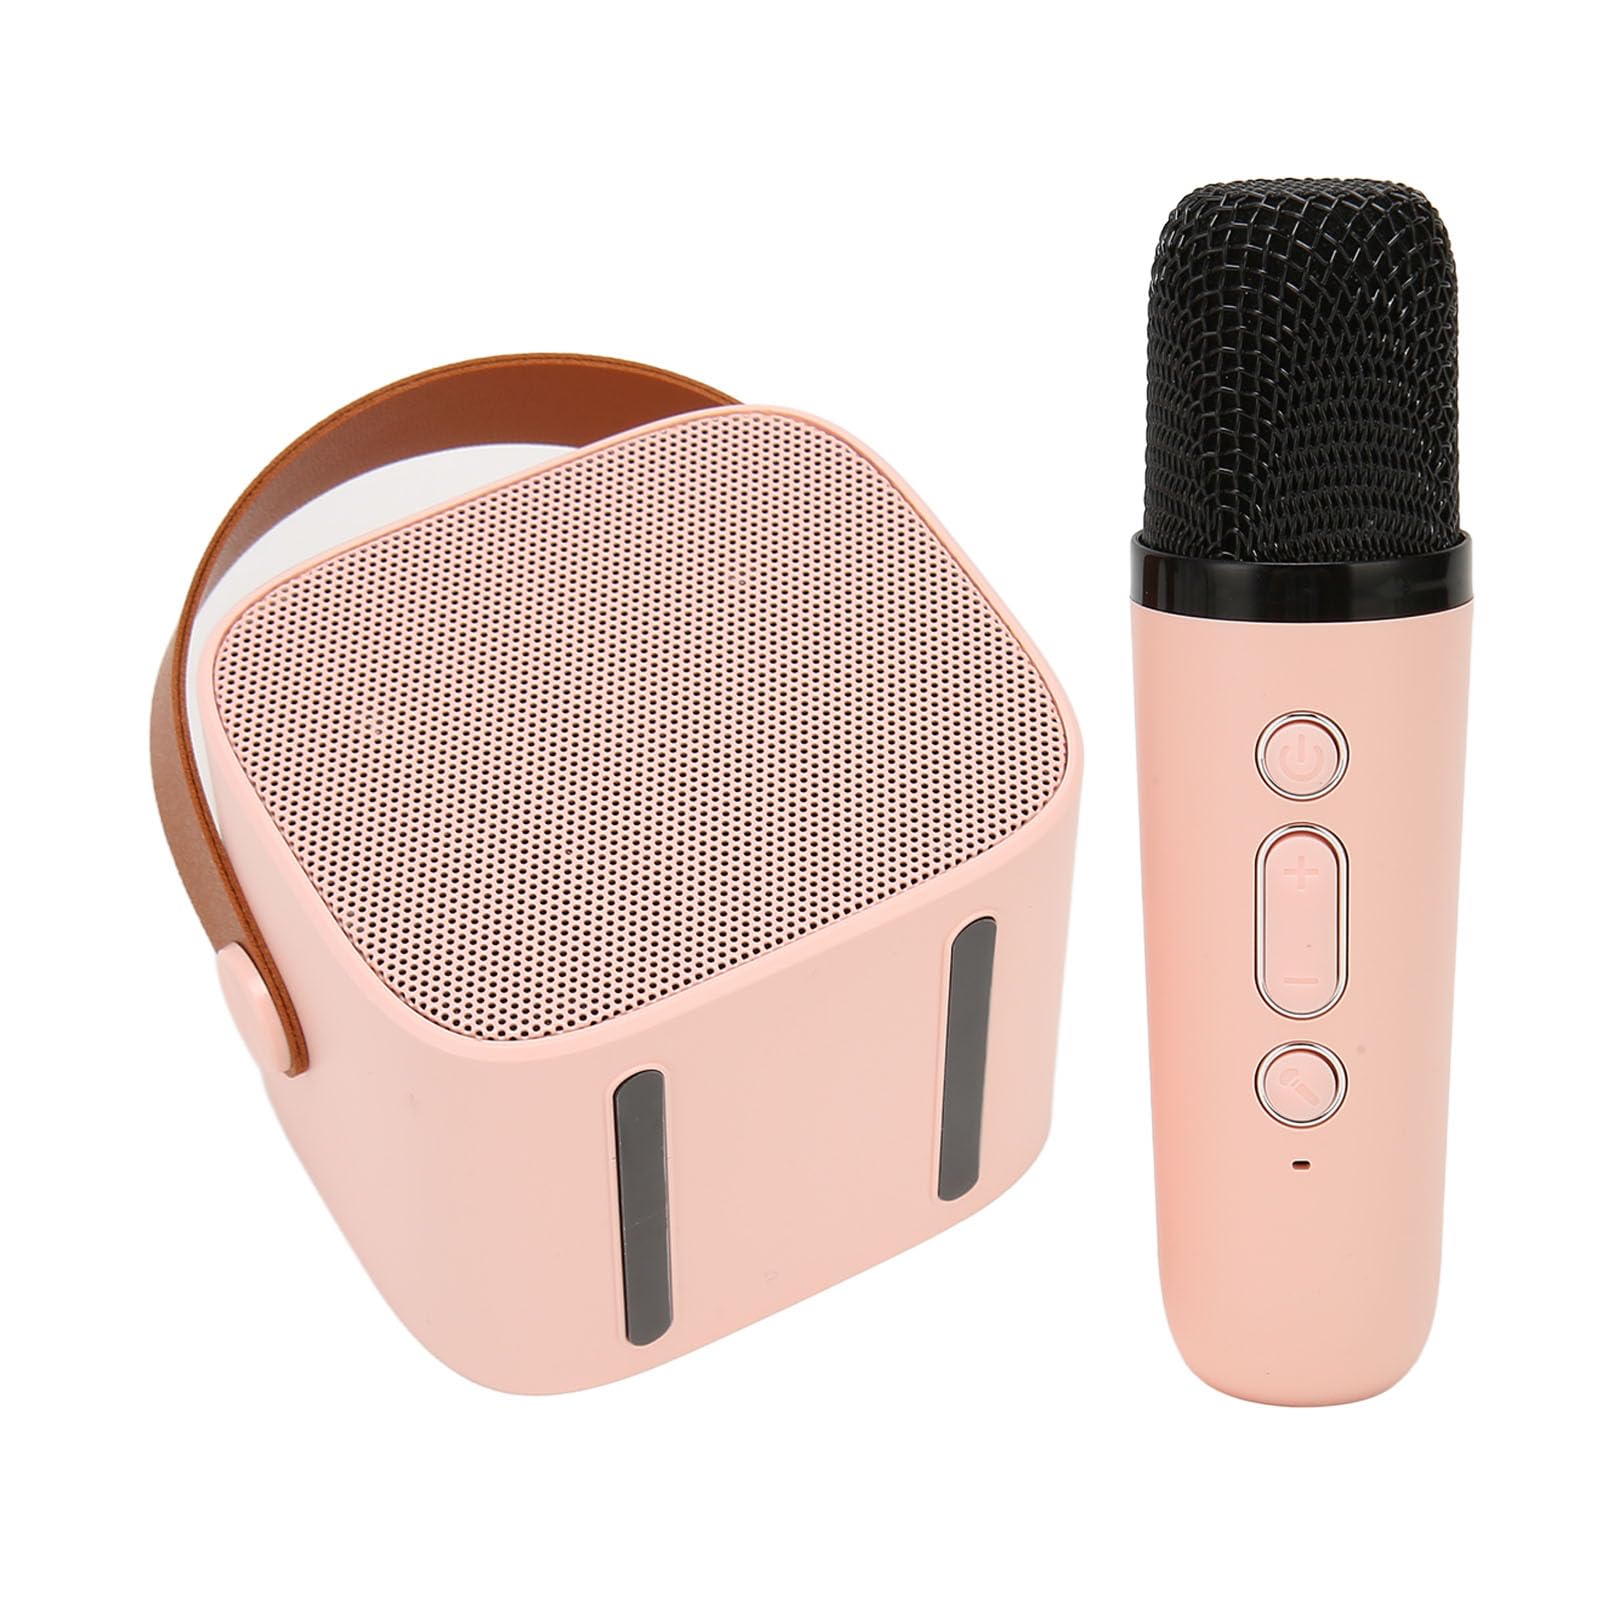 Microphone and speaker